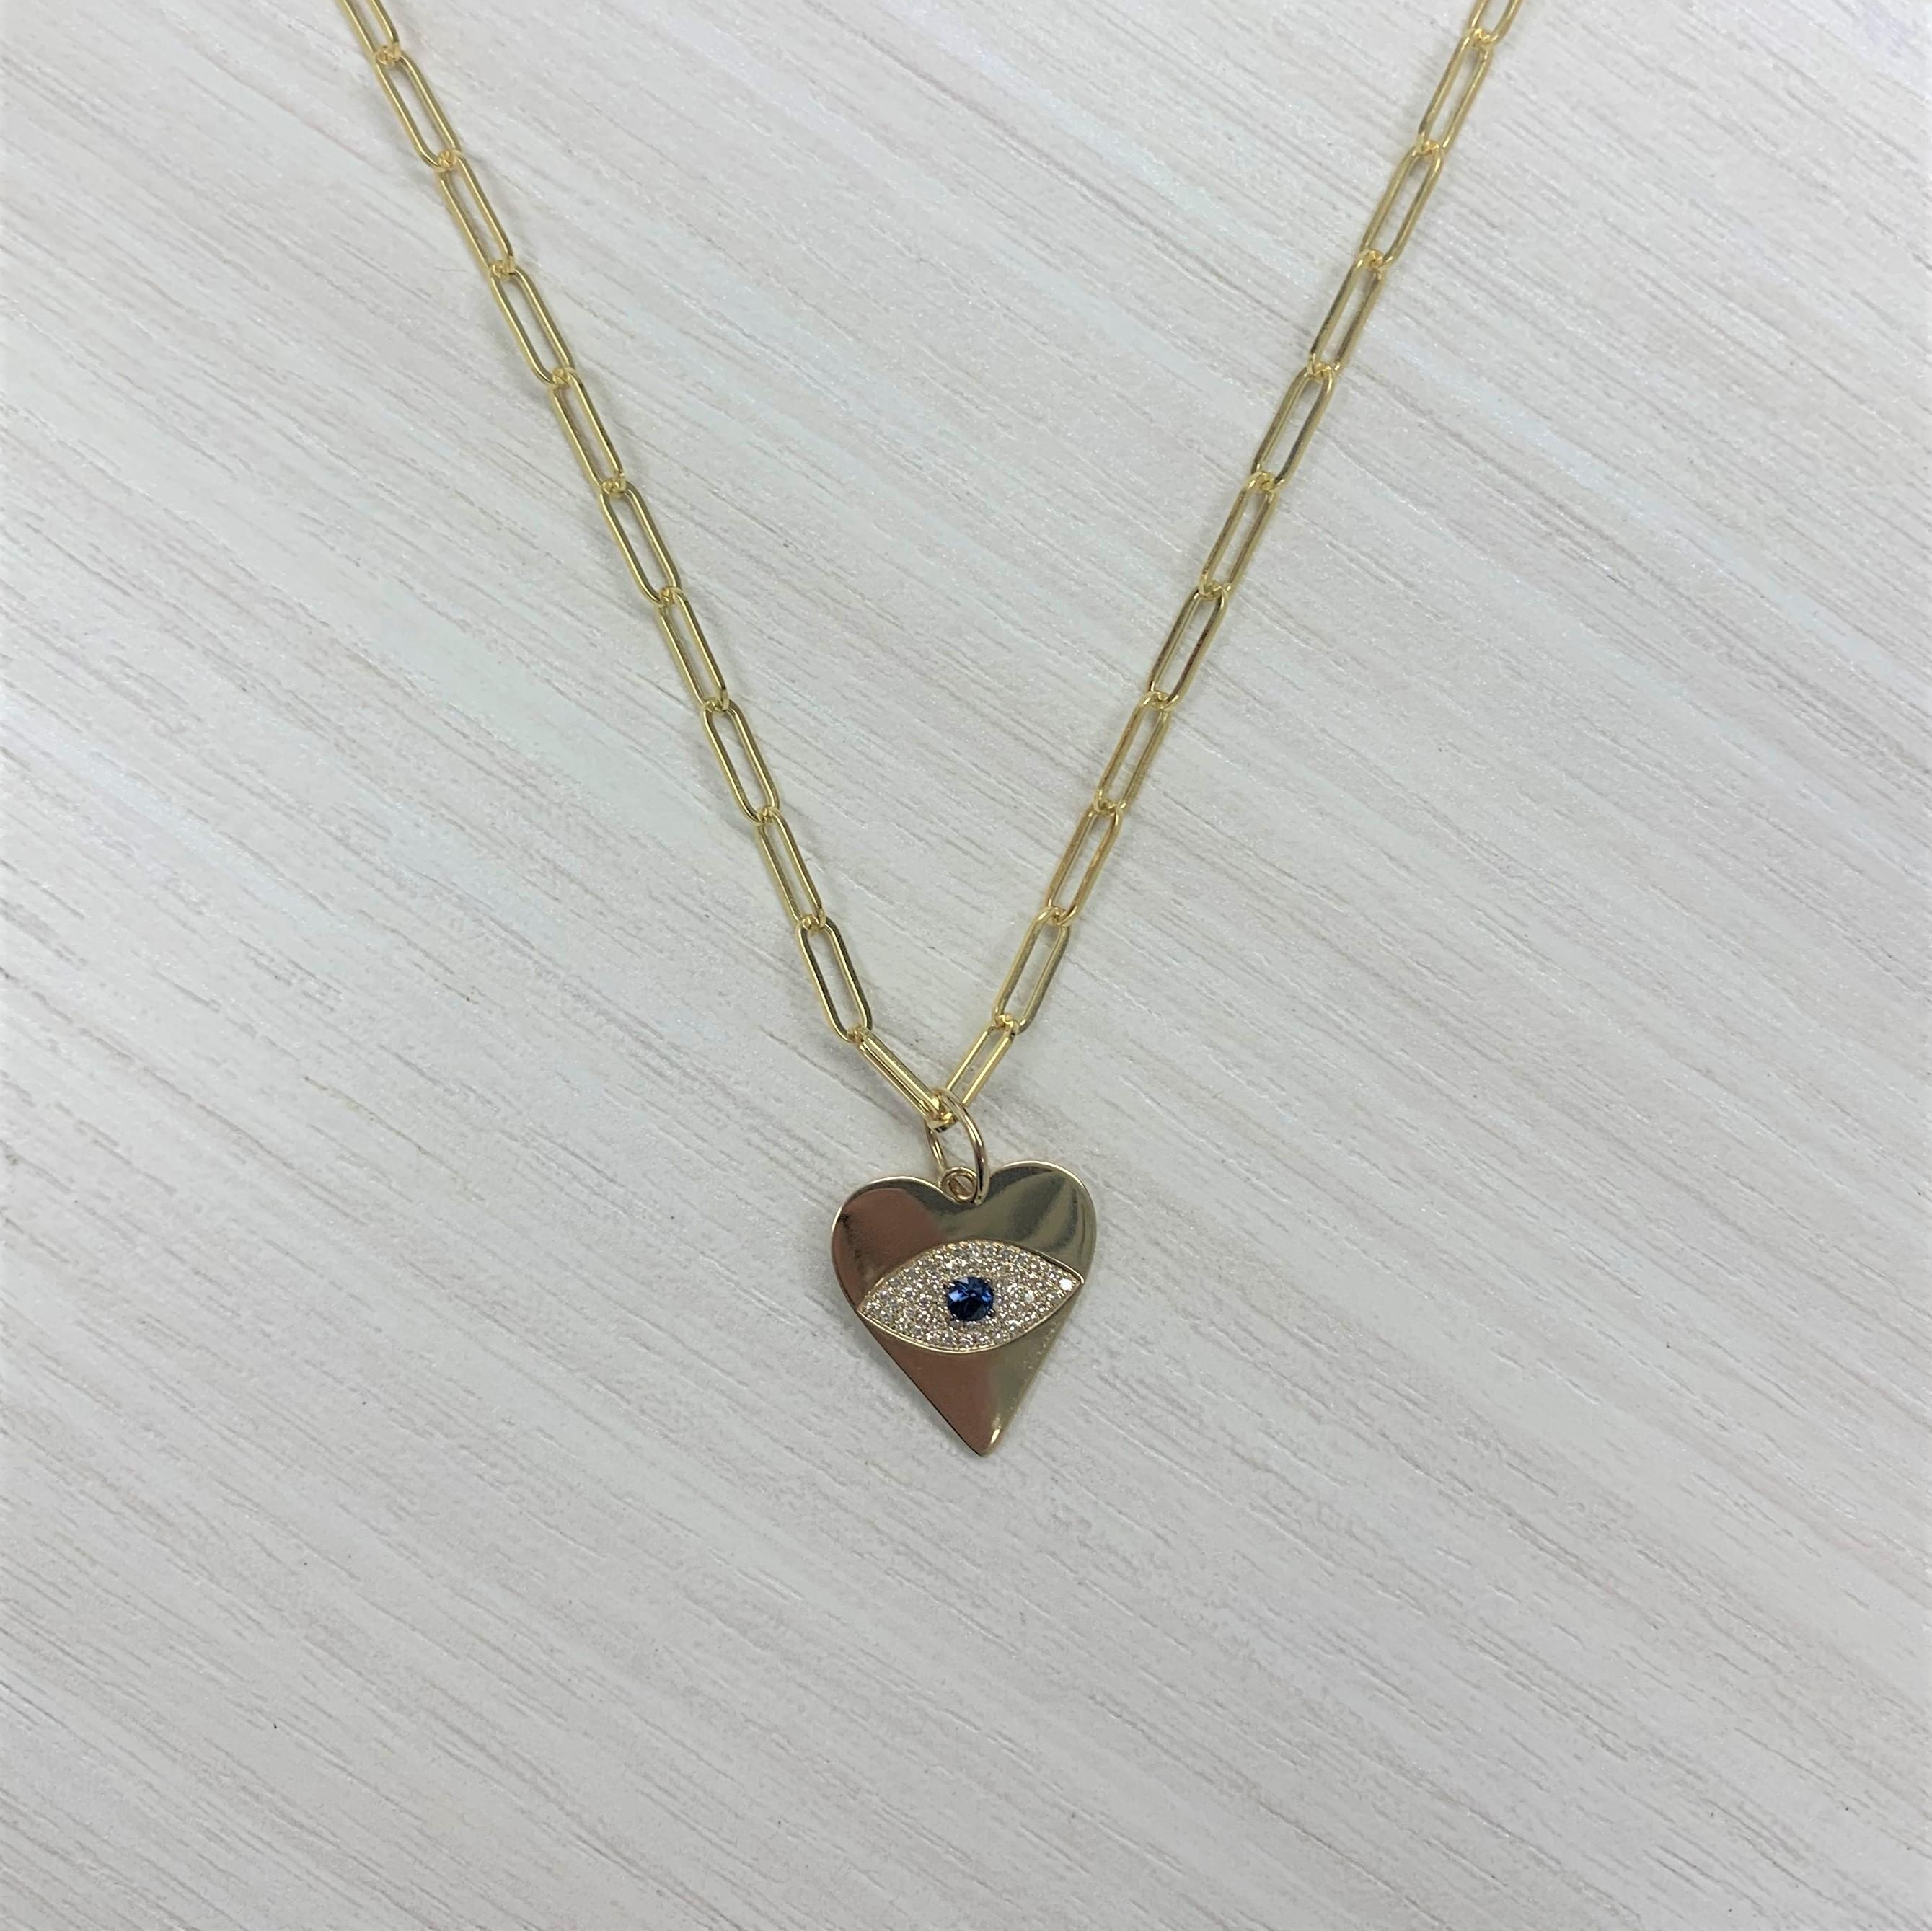 Made to inspire you to have strength and protection, this Evil Eye symbol makes every day your lucky day! Crafted of 14K Yellow gold this Heart necklace features 0.18 carats of natural round White Diamonds and 0.16 carats of Blue Sapphires, this